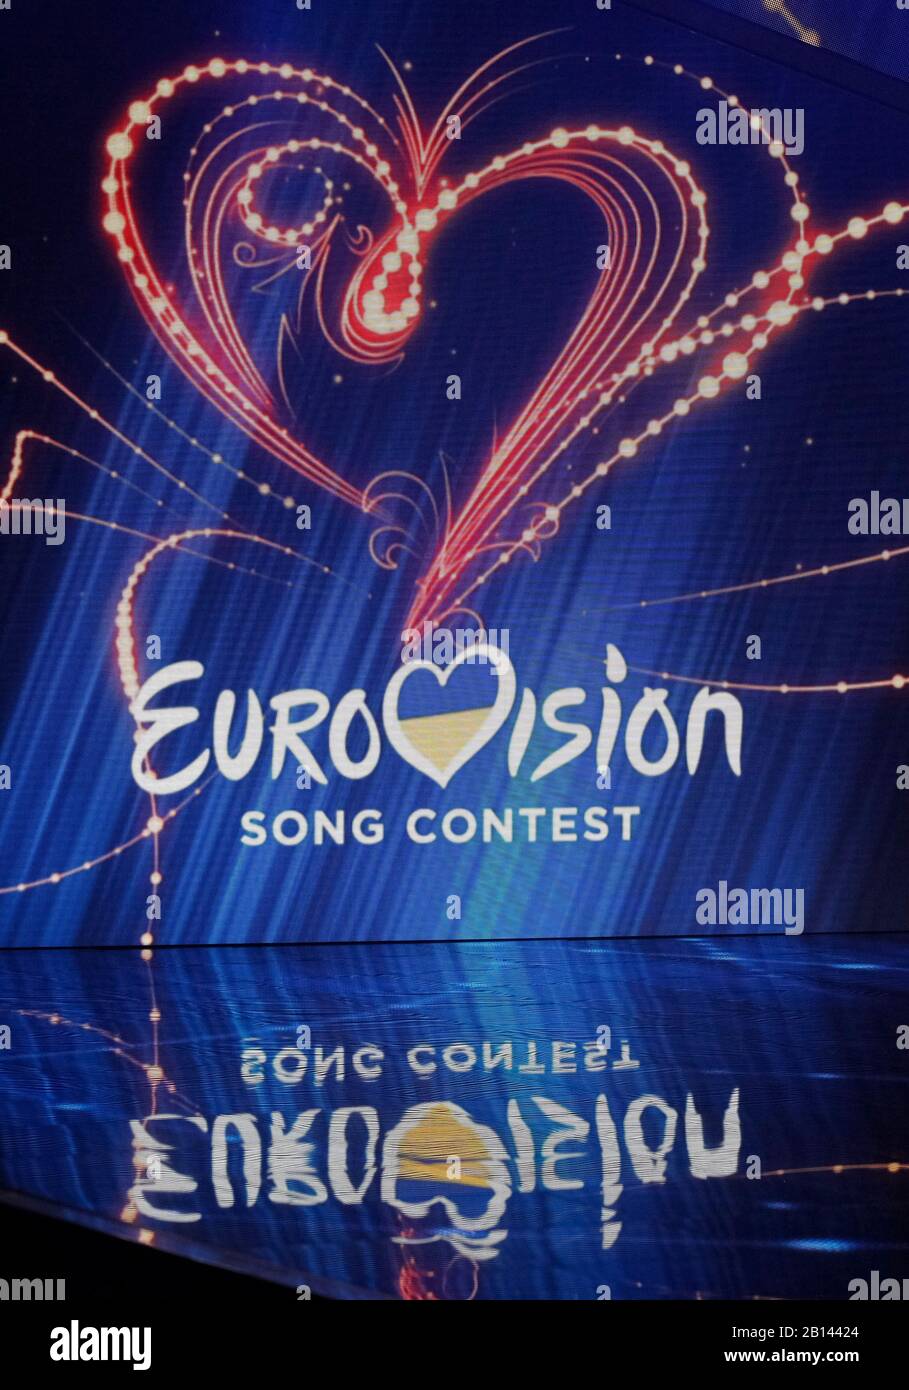 Kiev, Ukraine. 22nd Feb, 2020. The Eurovision Song Contest logo is seen on a screen during the 2020 Eurovision Song Contest (ESC) national selection show in Kiev.Ukrainian band Go A with song Solovey will represent Ukraine at the 2020 Eurovision Song Contest (ESC) in Netherlands. The 65th anniversary Eurovision song contest will be held in Rotterdam (Netherlands) from May 12 to May 16, 2020. Ukraine, which missed the competition last year, intends to return to participation in 2020. Credit: SOPA Images Limited/Alamy Live News Stock Photo